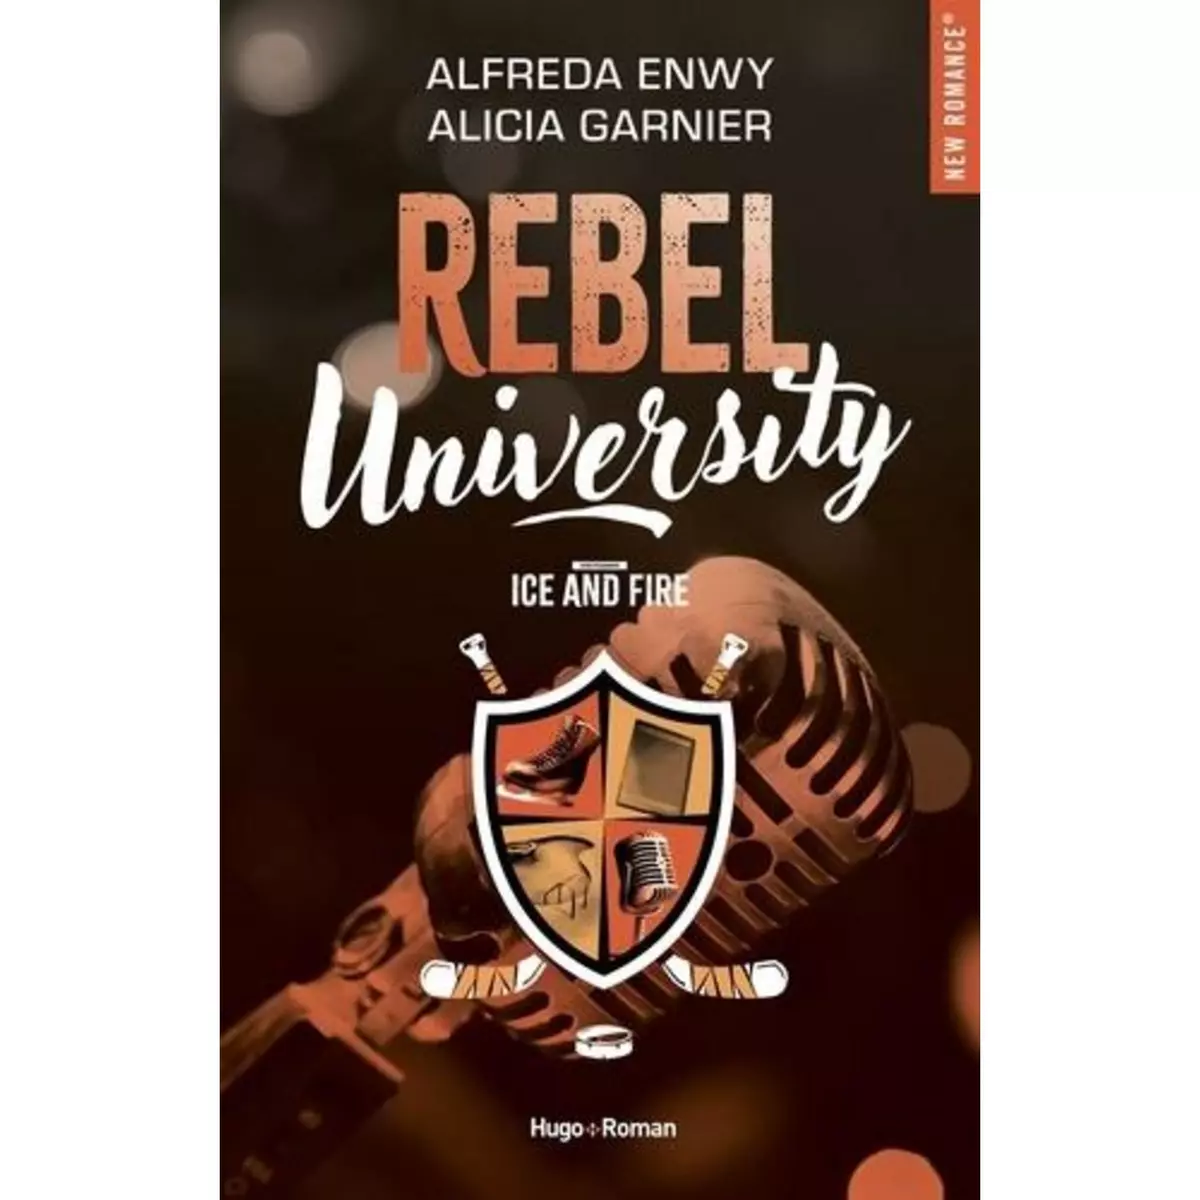  REBEL UNIVERSITY TOME 3 : ICE AND FIRE, Enwy Alfreda